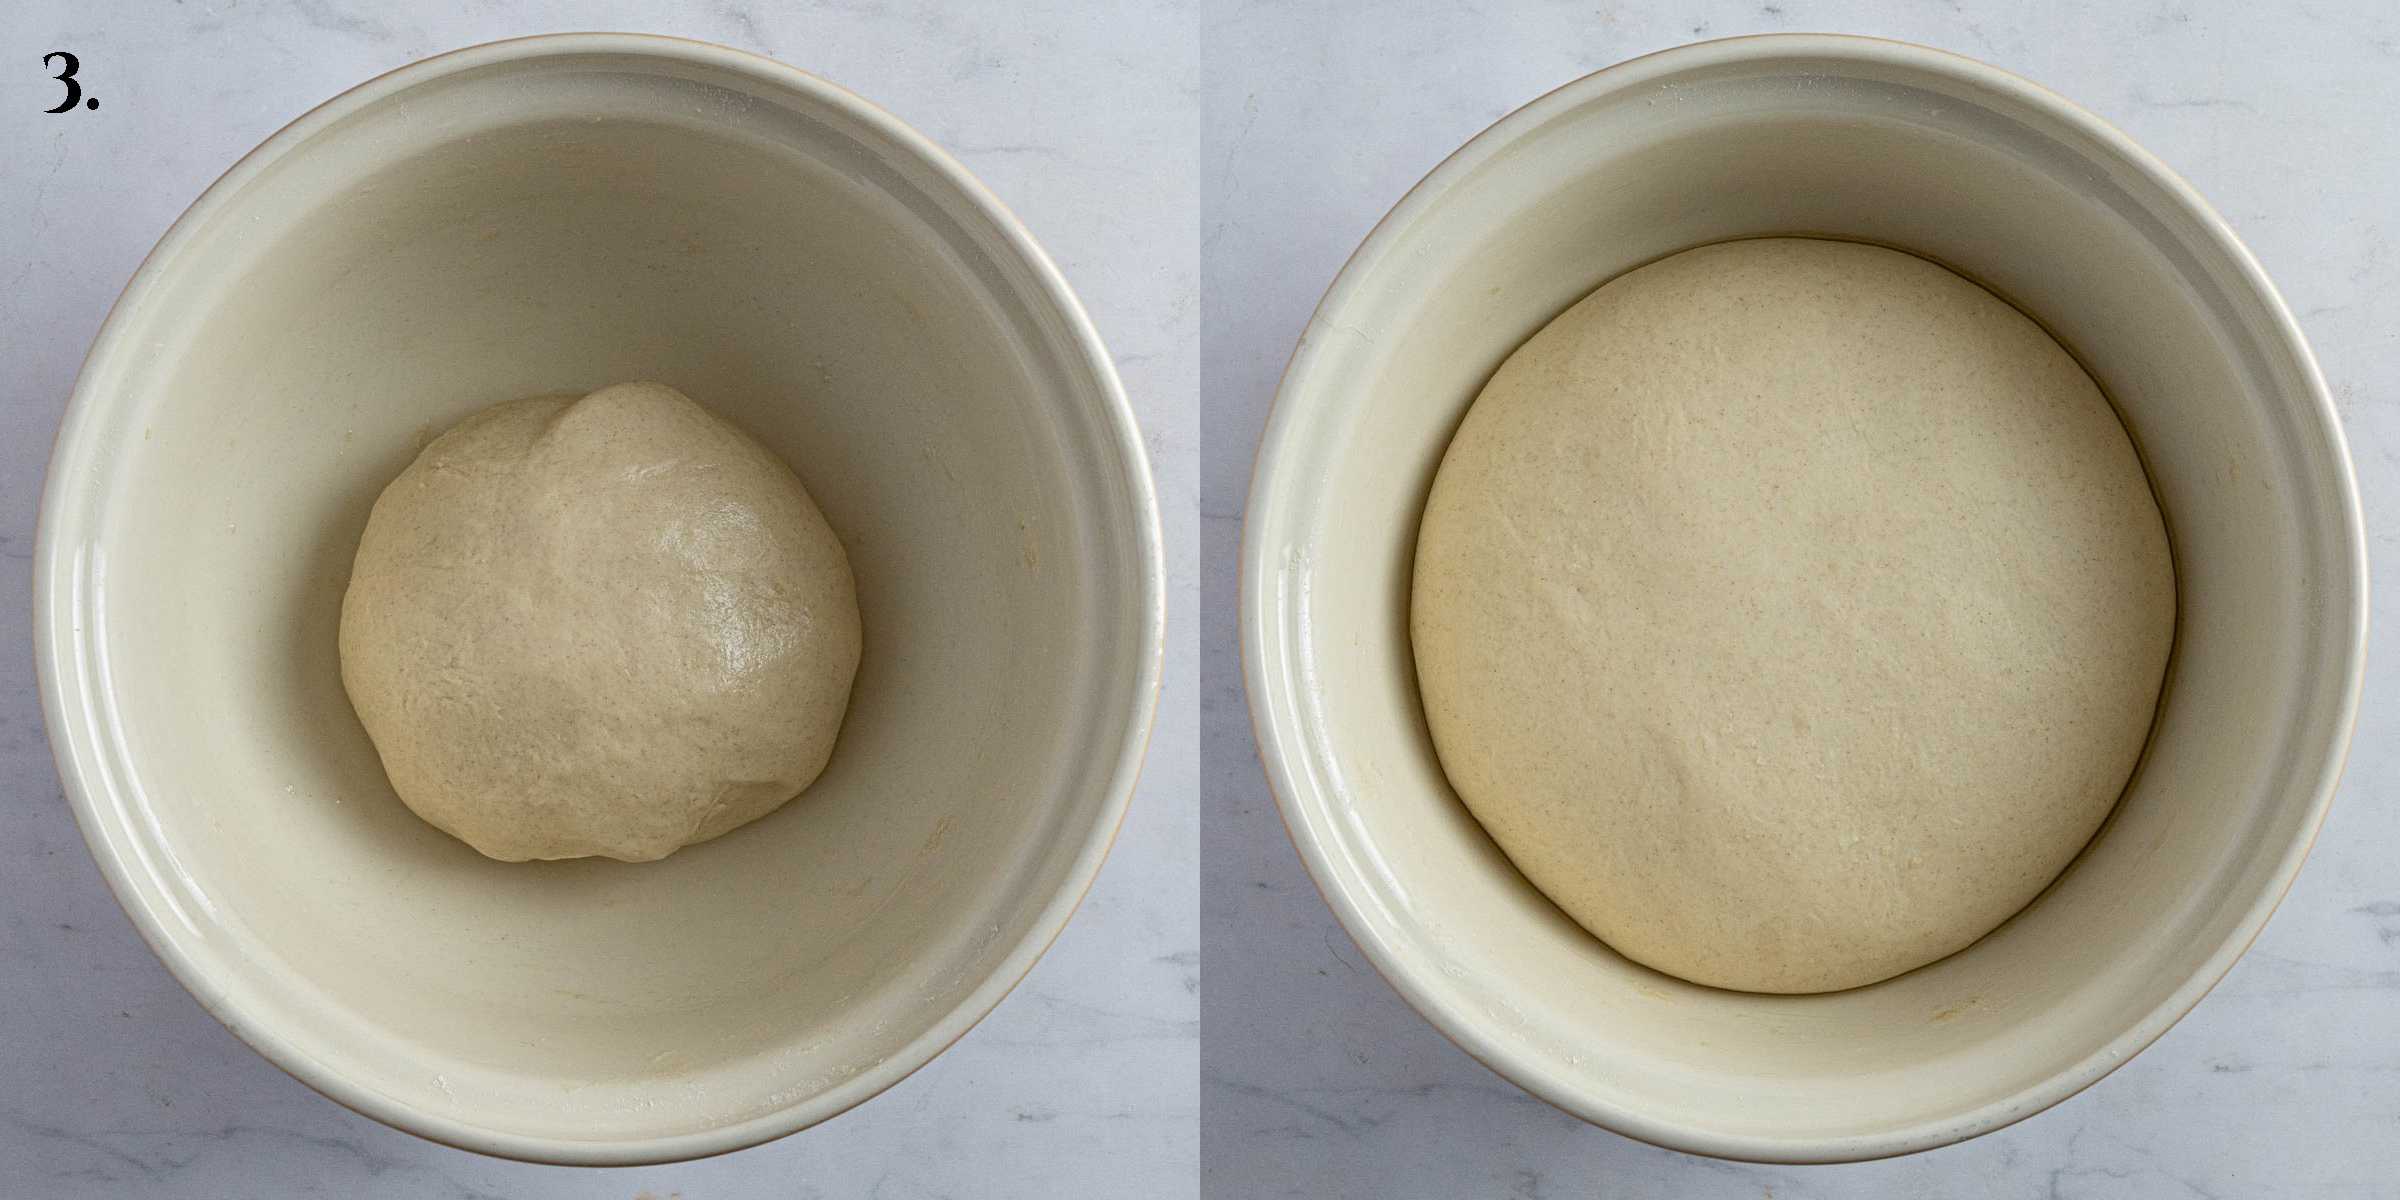 Step 3, a trwo image collage of the dough before and after rising.